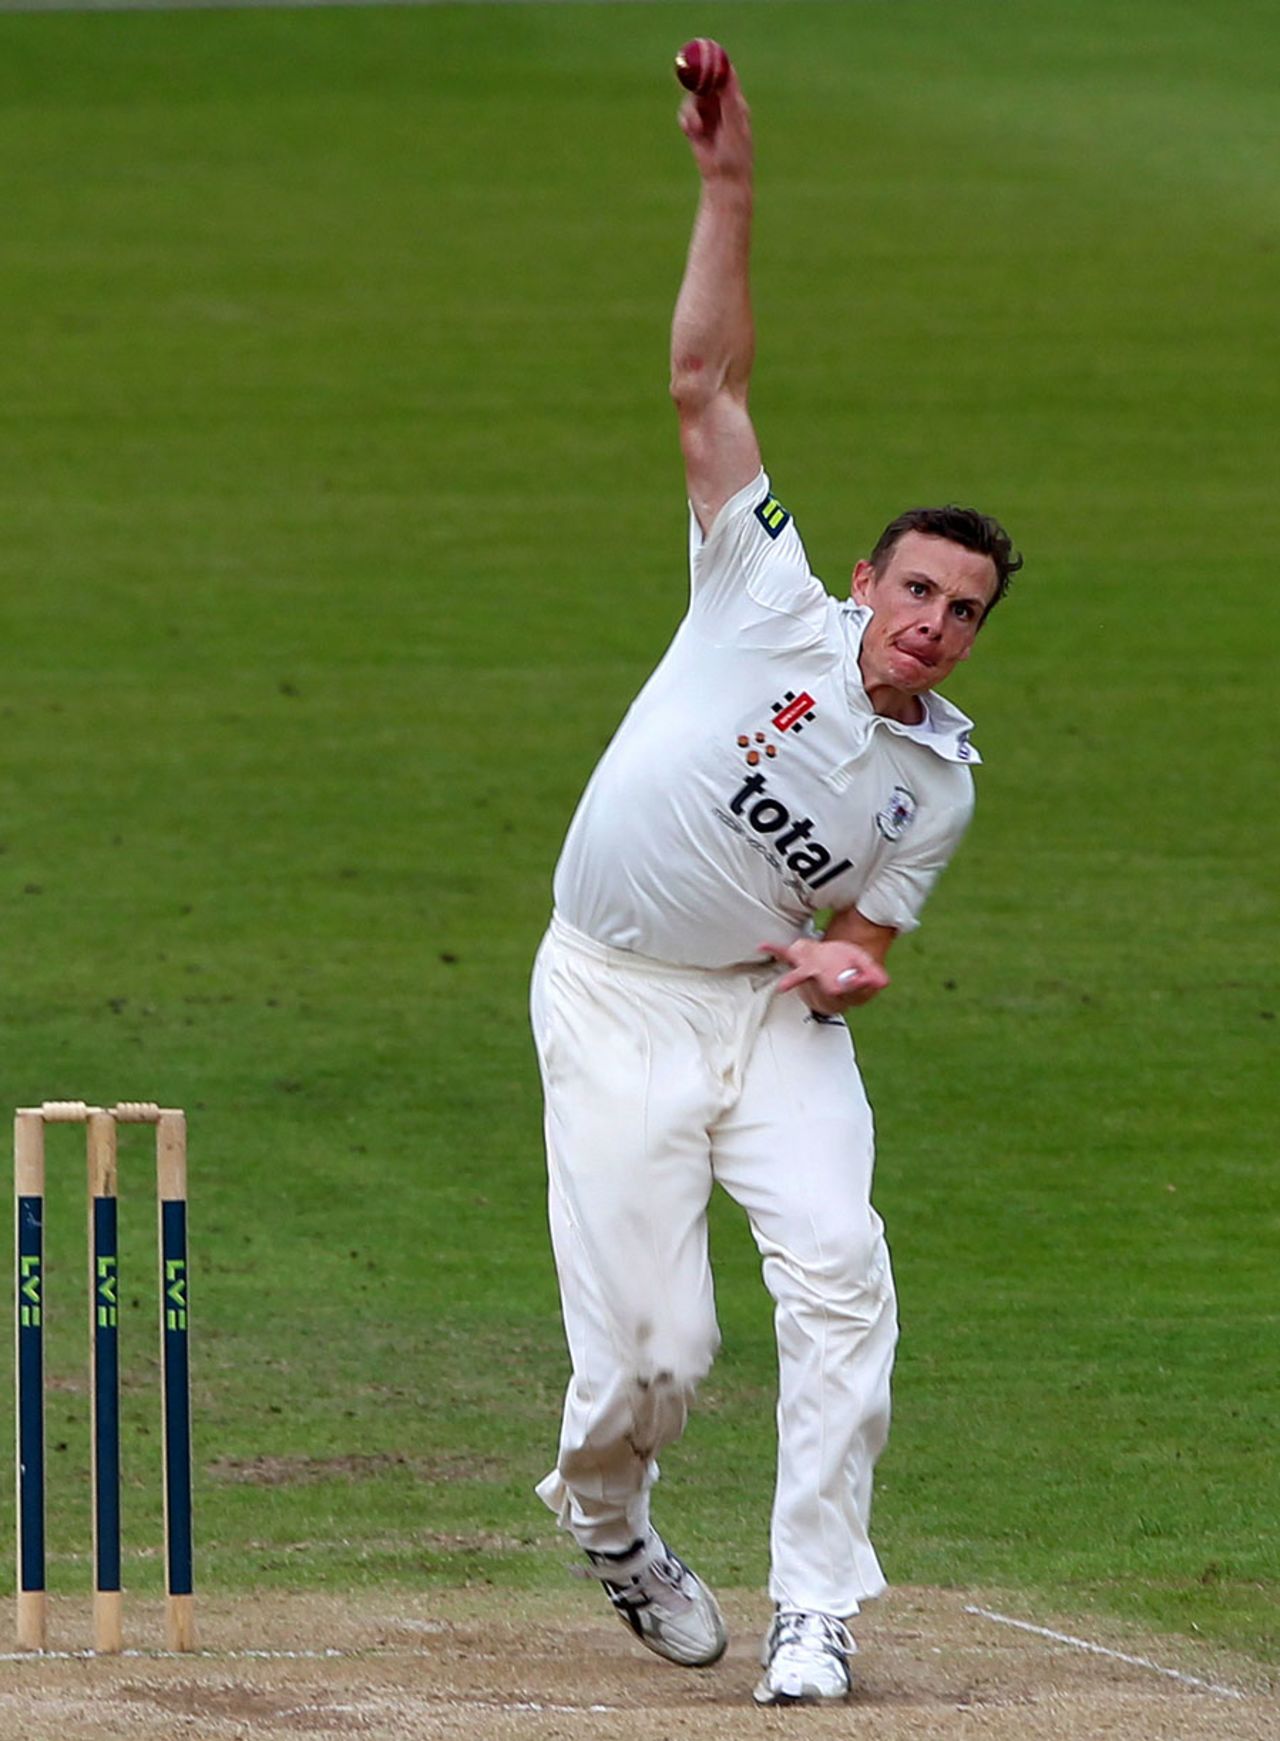 Will Gidman was back bowling after a first-innings five-for, Leicestershire v Gloucestershire, County Championship, Division Two, Grace Road, 2nd day, June 3, 2014